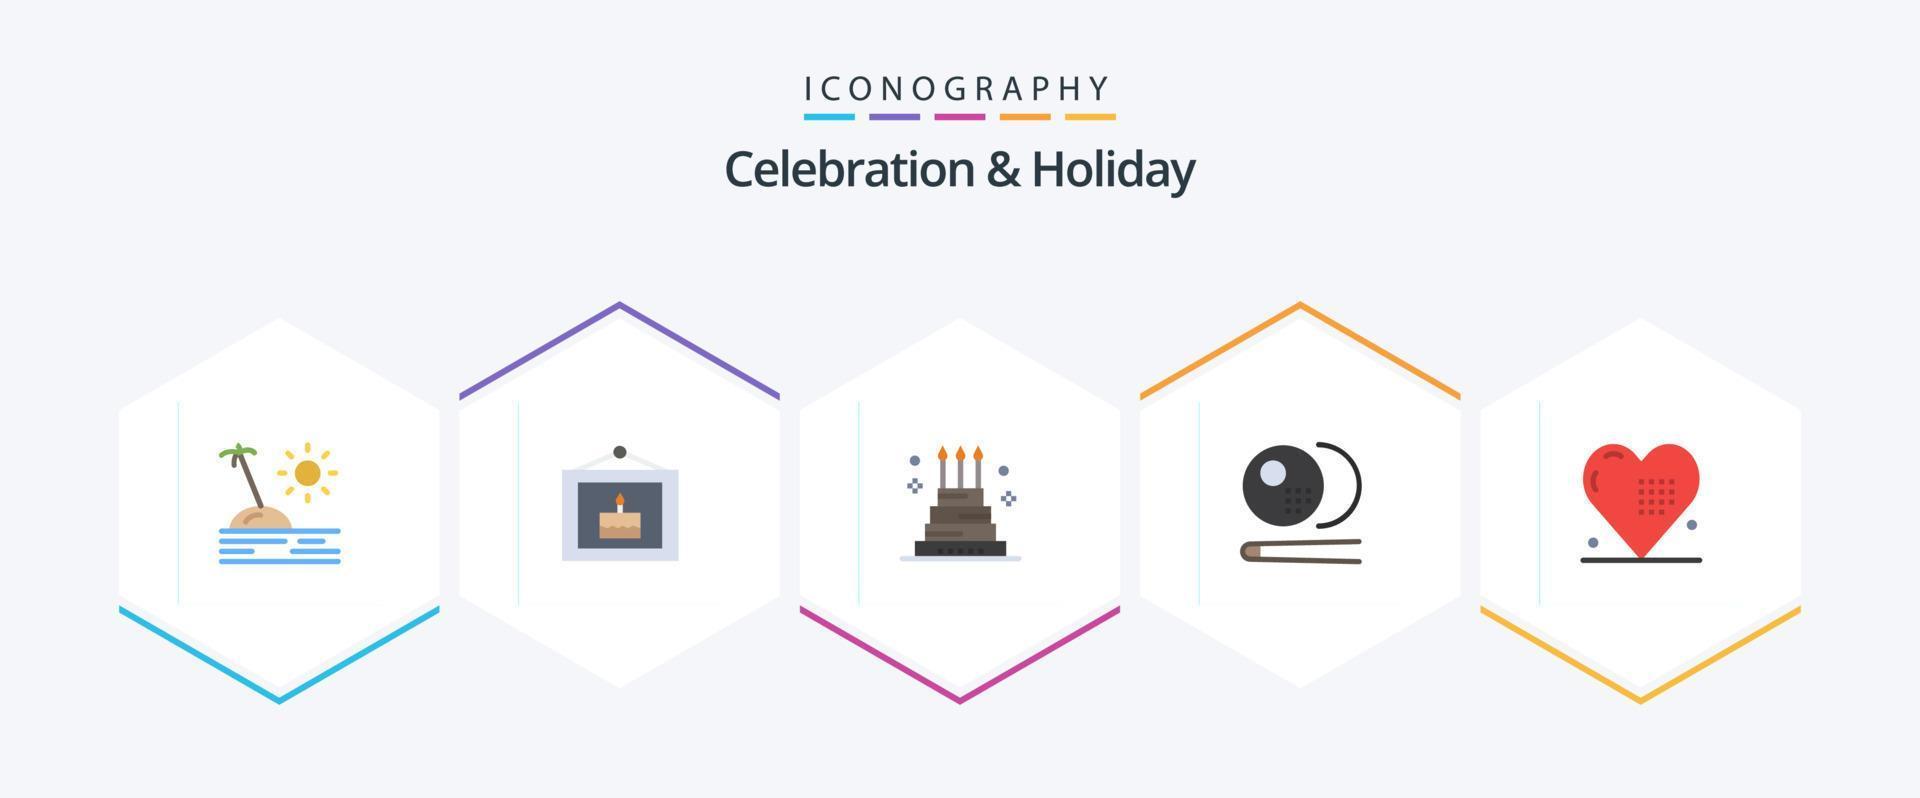 Celebration and Holiday 25 Flat icon pack including celebration. snooker. cake. pool. holiday vector